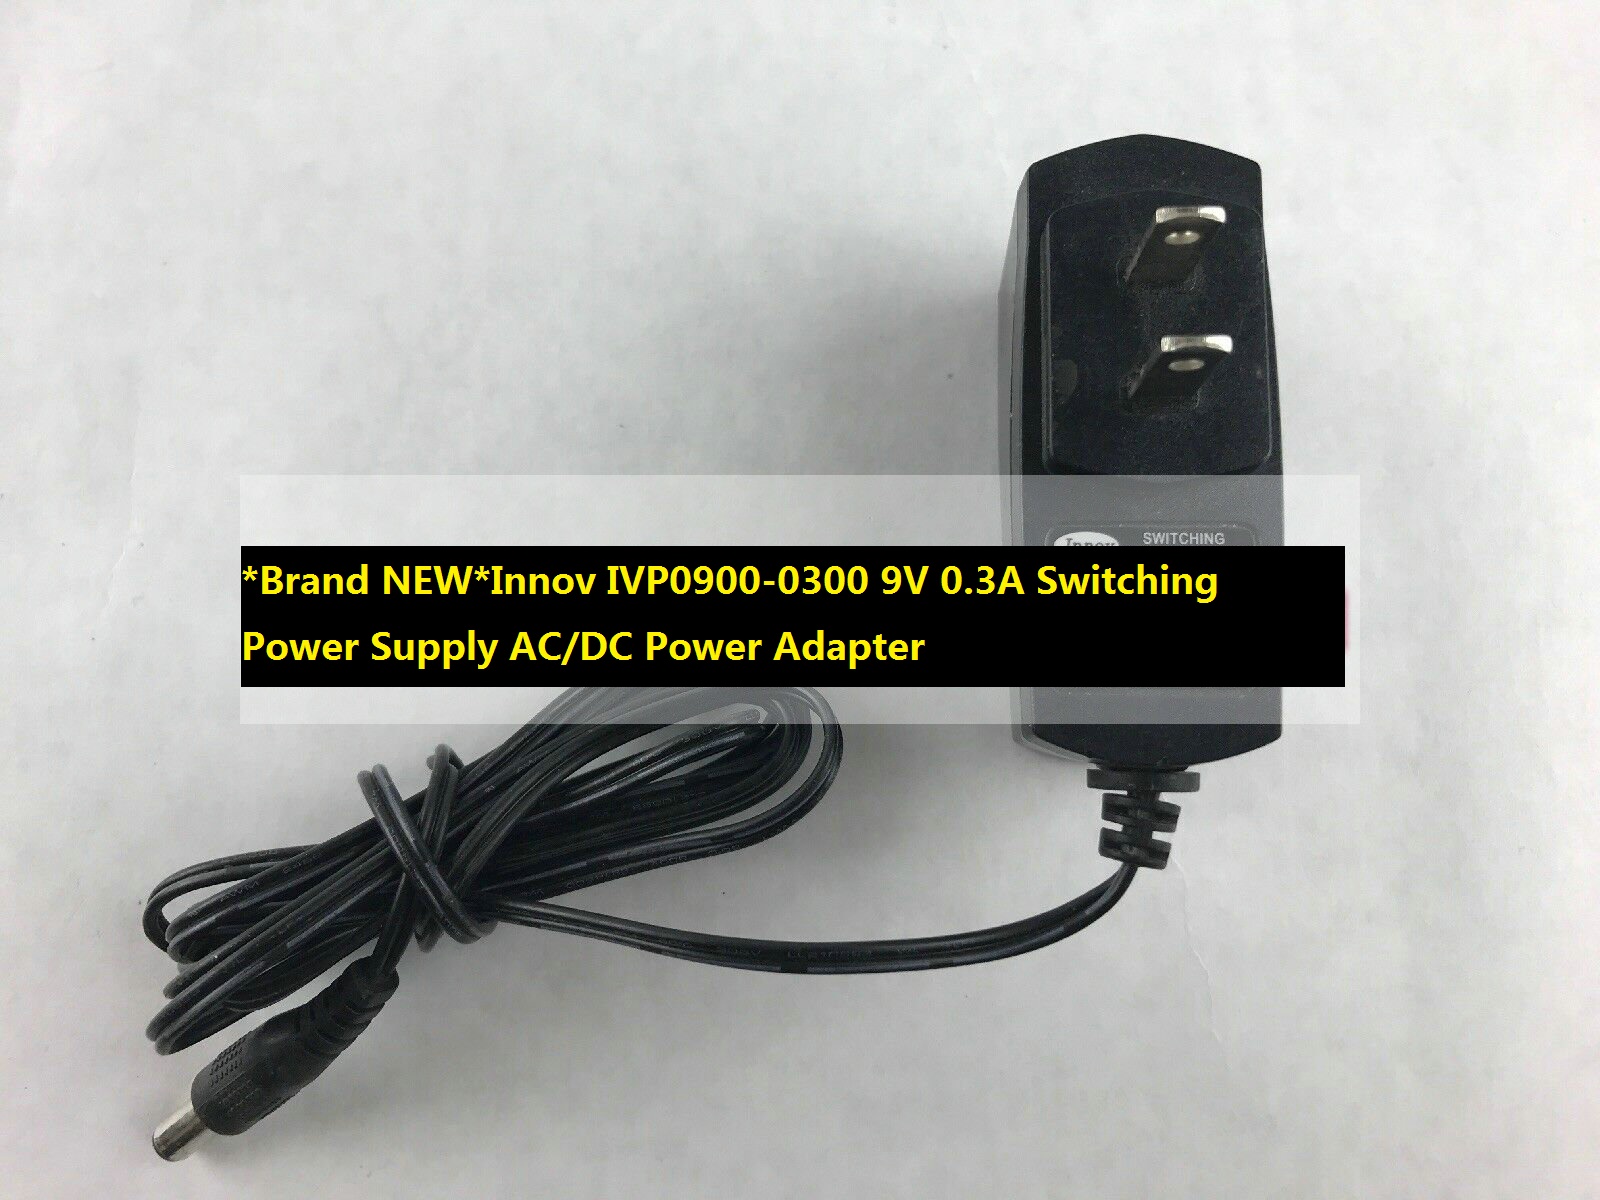 *Brand NEW*Innov IVP0900-0300 9V 0.3A Switching Power Supply AC/DC Power Adapter - Click Image to Close